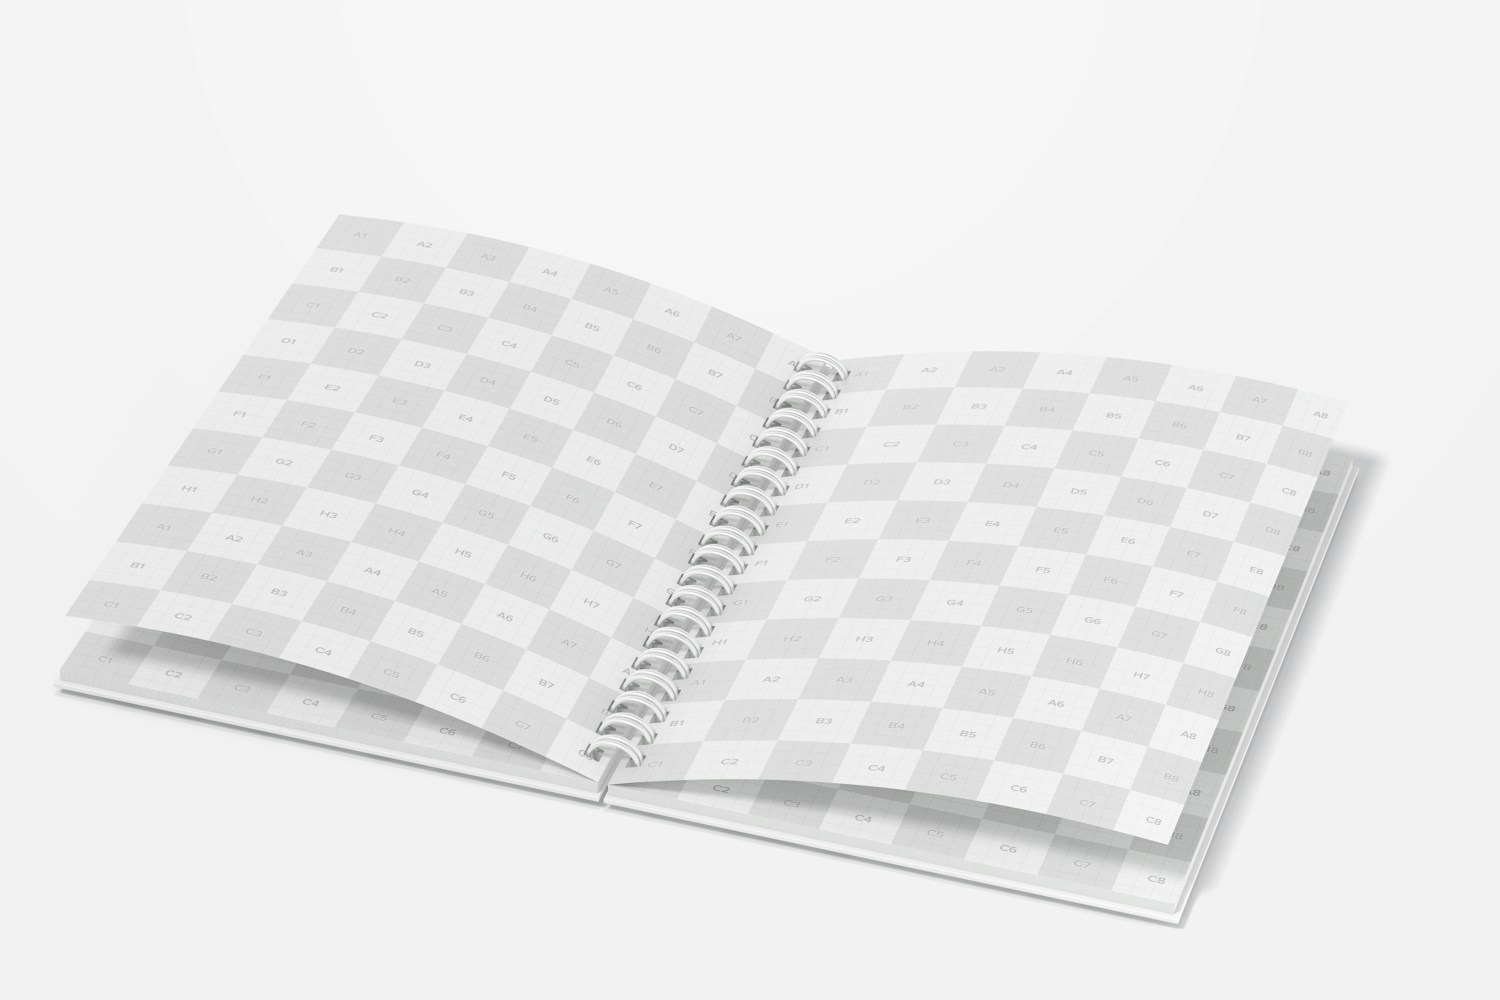 Plastic Cover Wire Bound Notepad Mockup, Opened